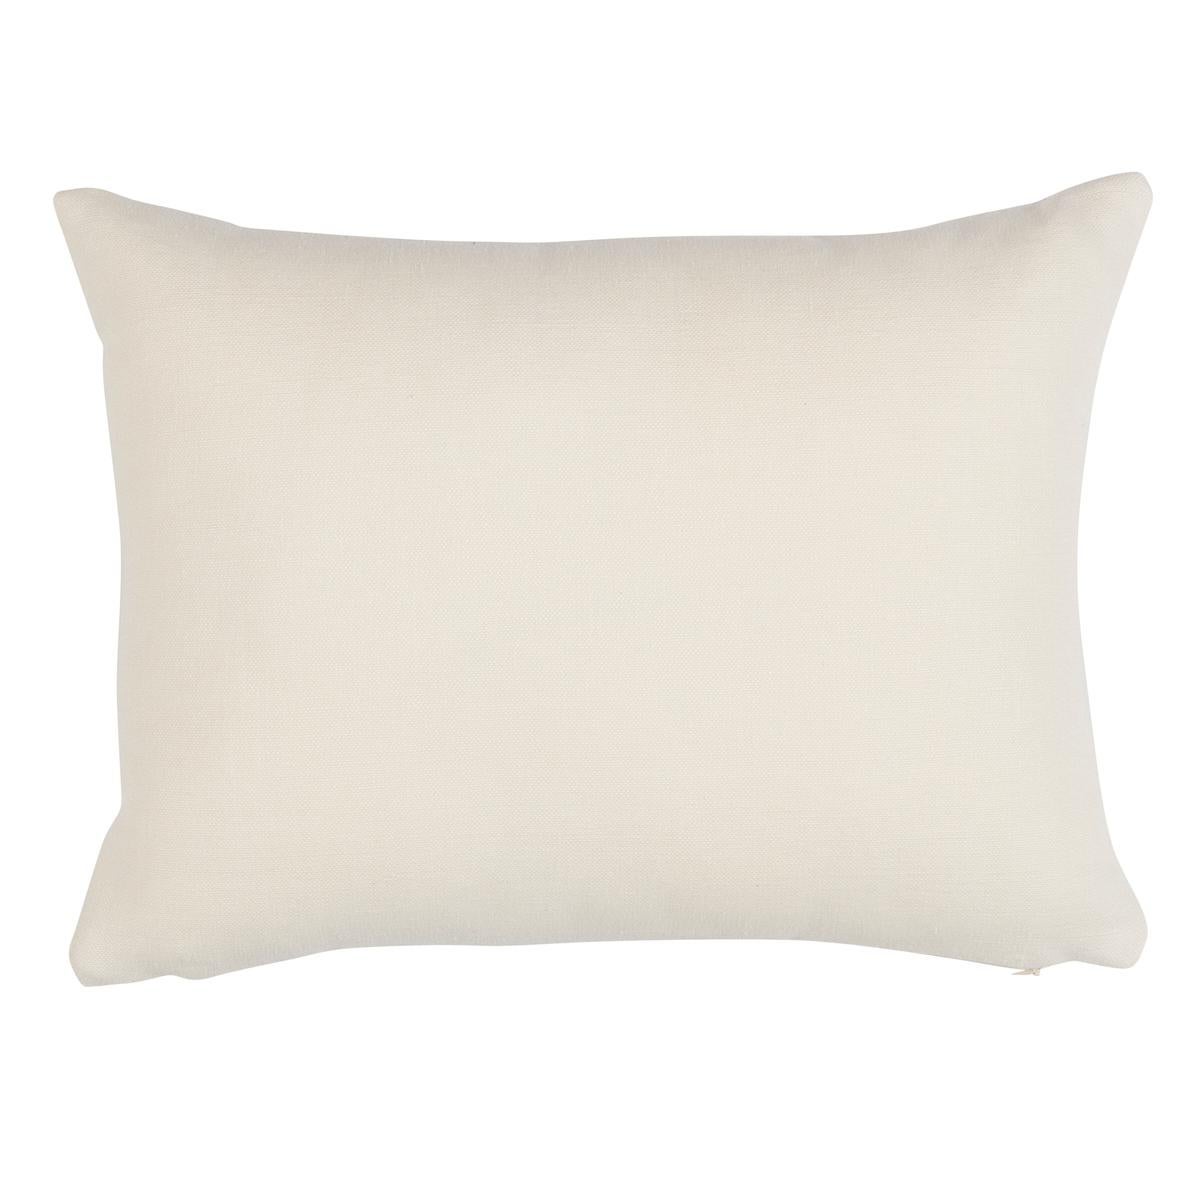 This pillow features Infinito Indoor/Outdoor Trim with a knife edge finish. With its interesting, interlocking loop motif, Infinito Indoor/Outdoor Trim is a versatile, transitional trim that is as stylish as it is practical. Body of pillow is